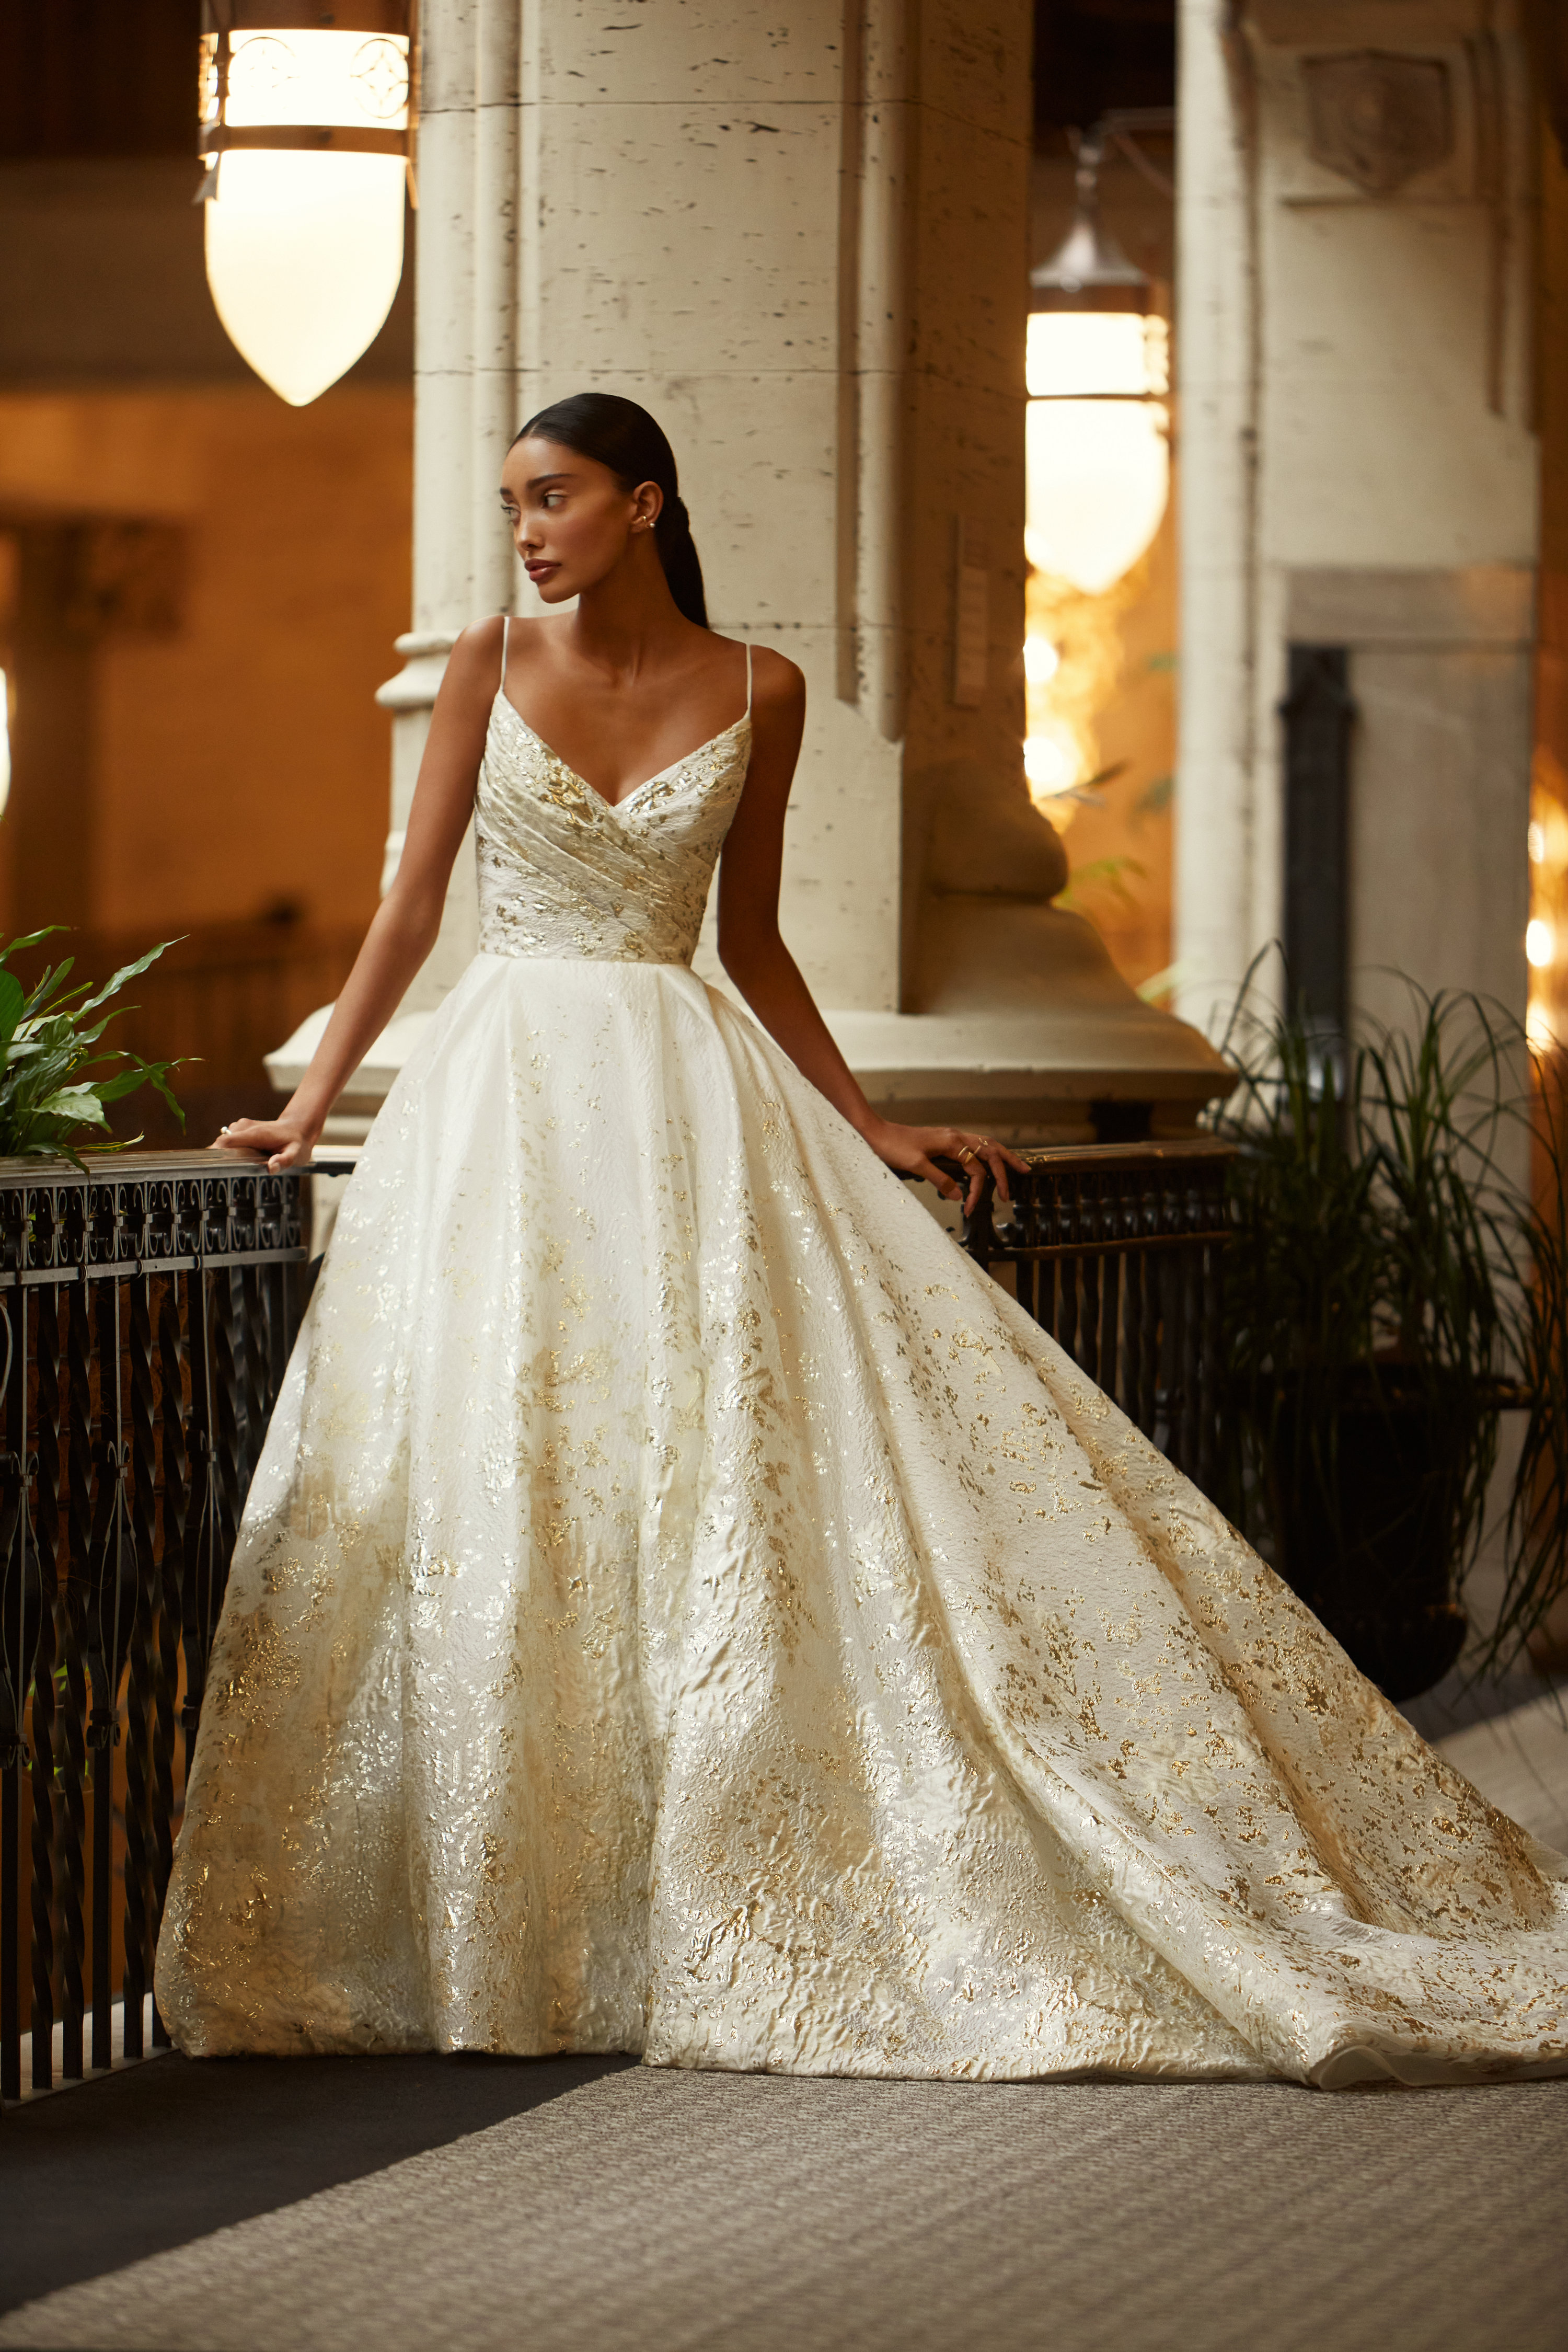 Strapless Sweetheart Neckline Embroidered Tulle Ball Gown Wedding Dress |  Kleinfeld Bridal